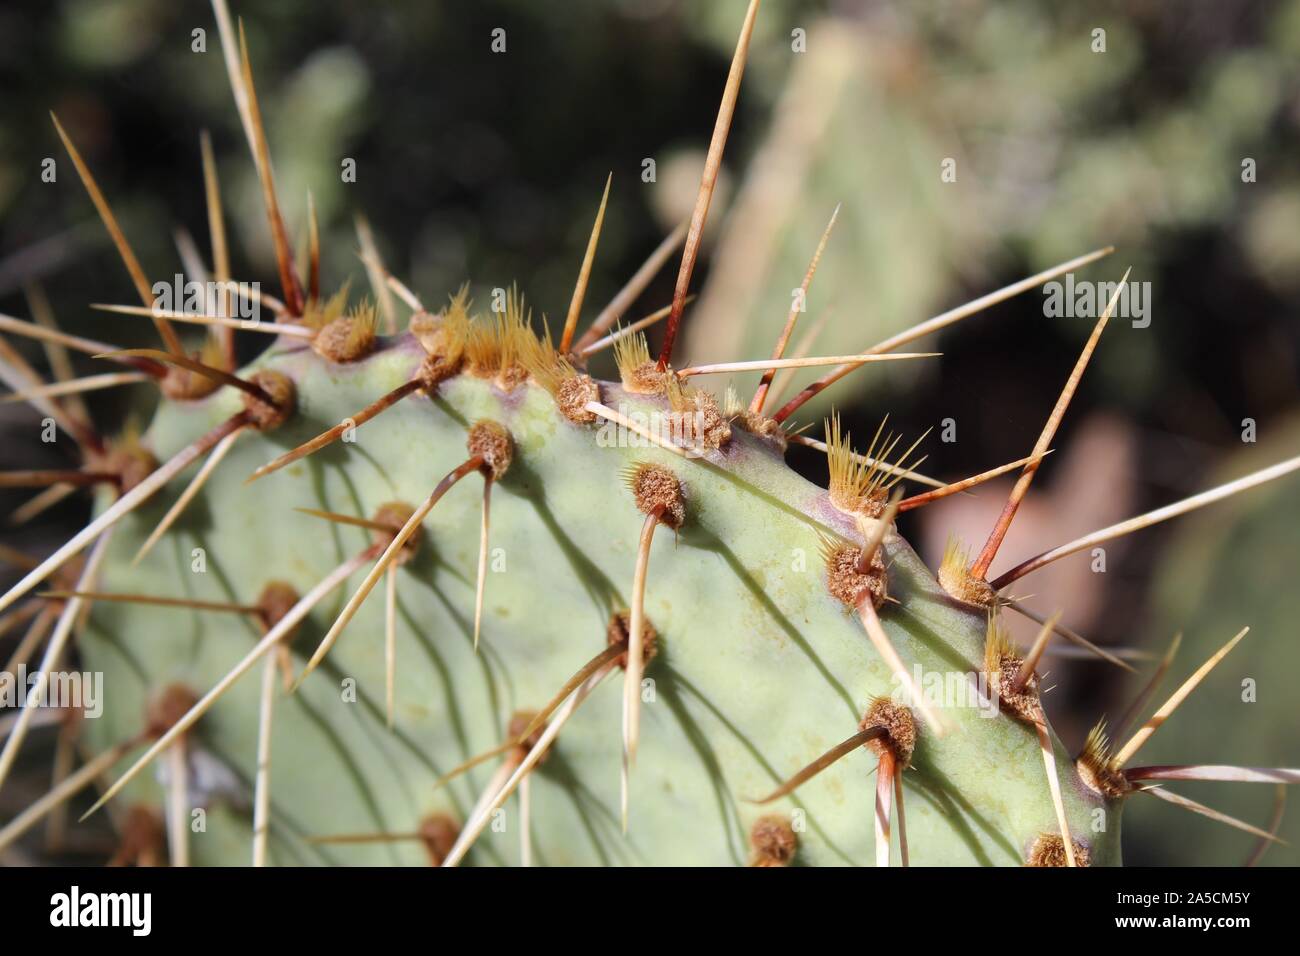 Southern Mojave Desert native cactus in Joshua Tree National Park, casually as Mojave Pricklypair, taxonomically ranked as Opuntia Phaeacantha. Stock Photo